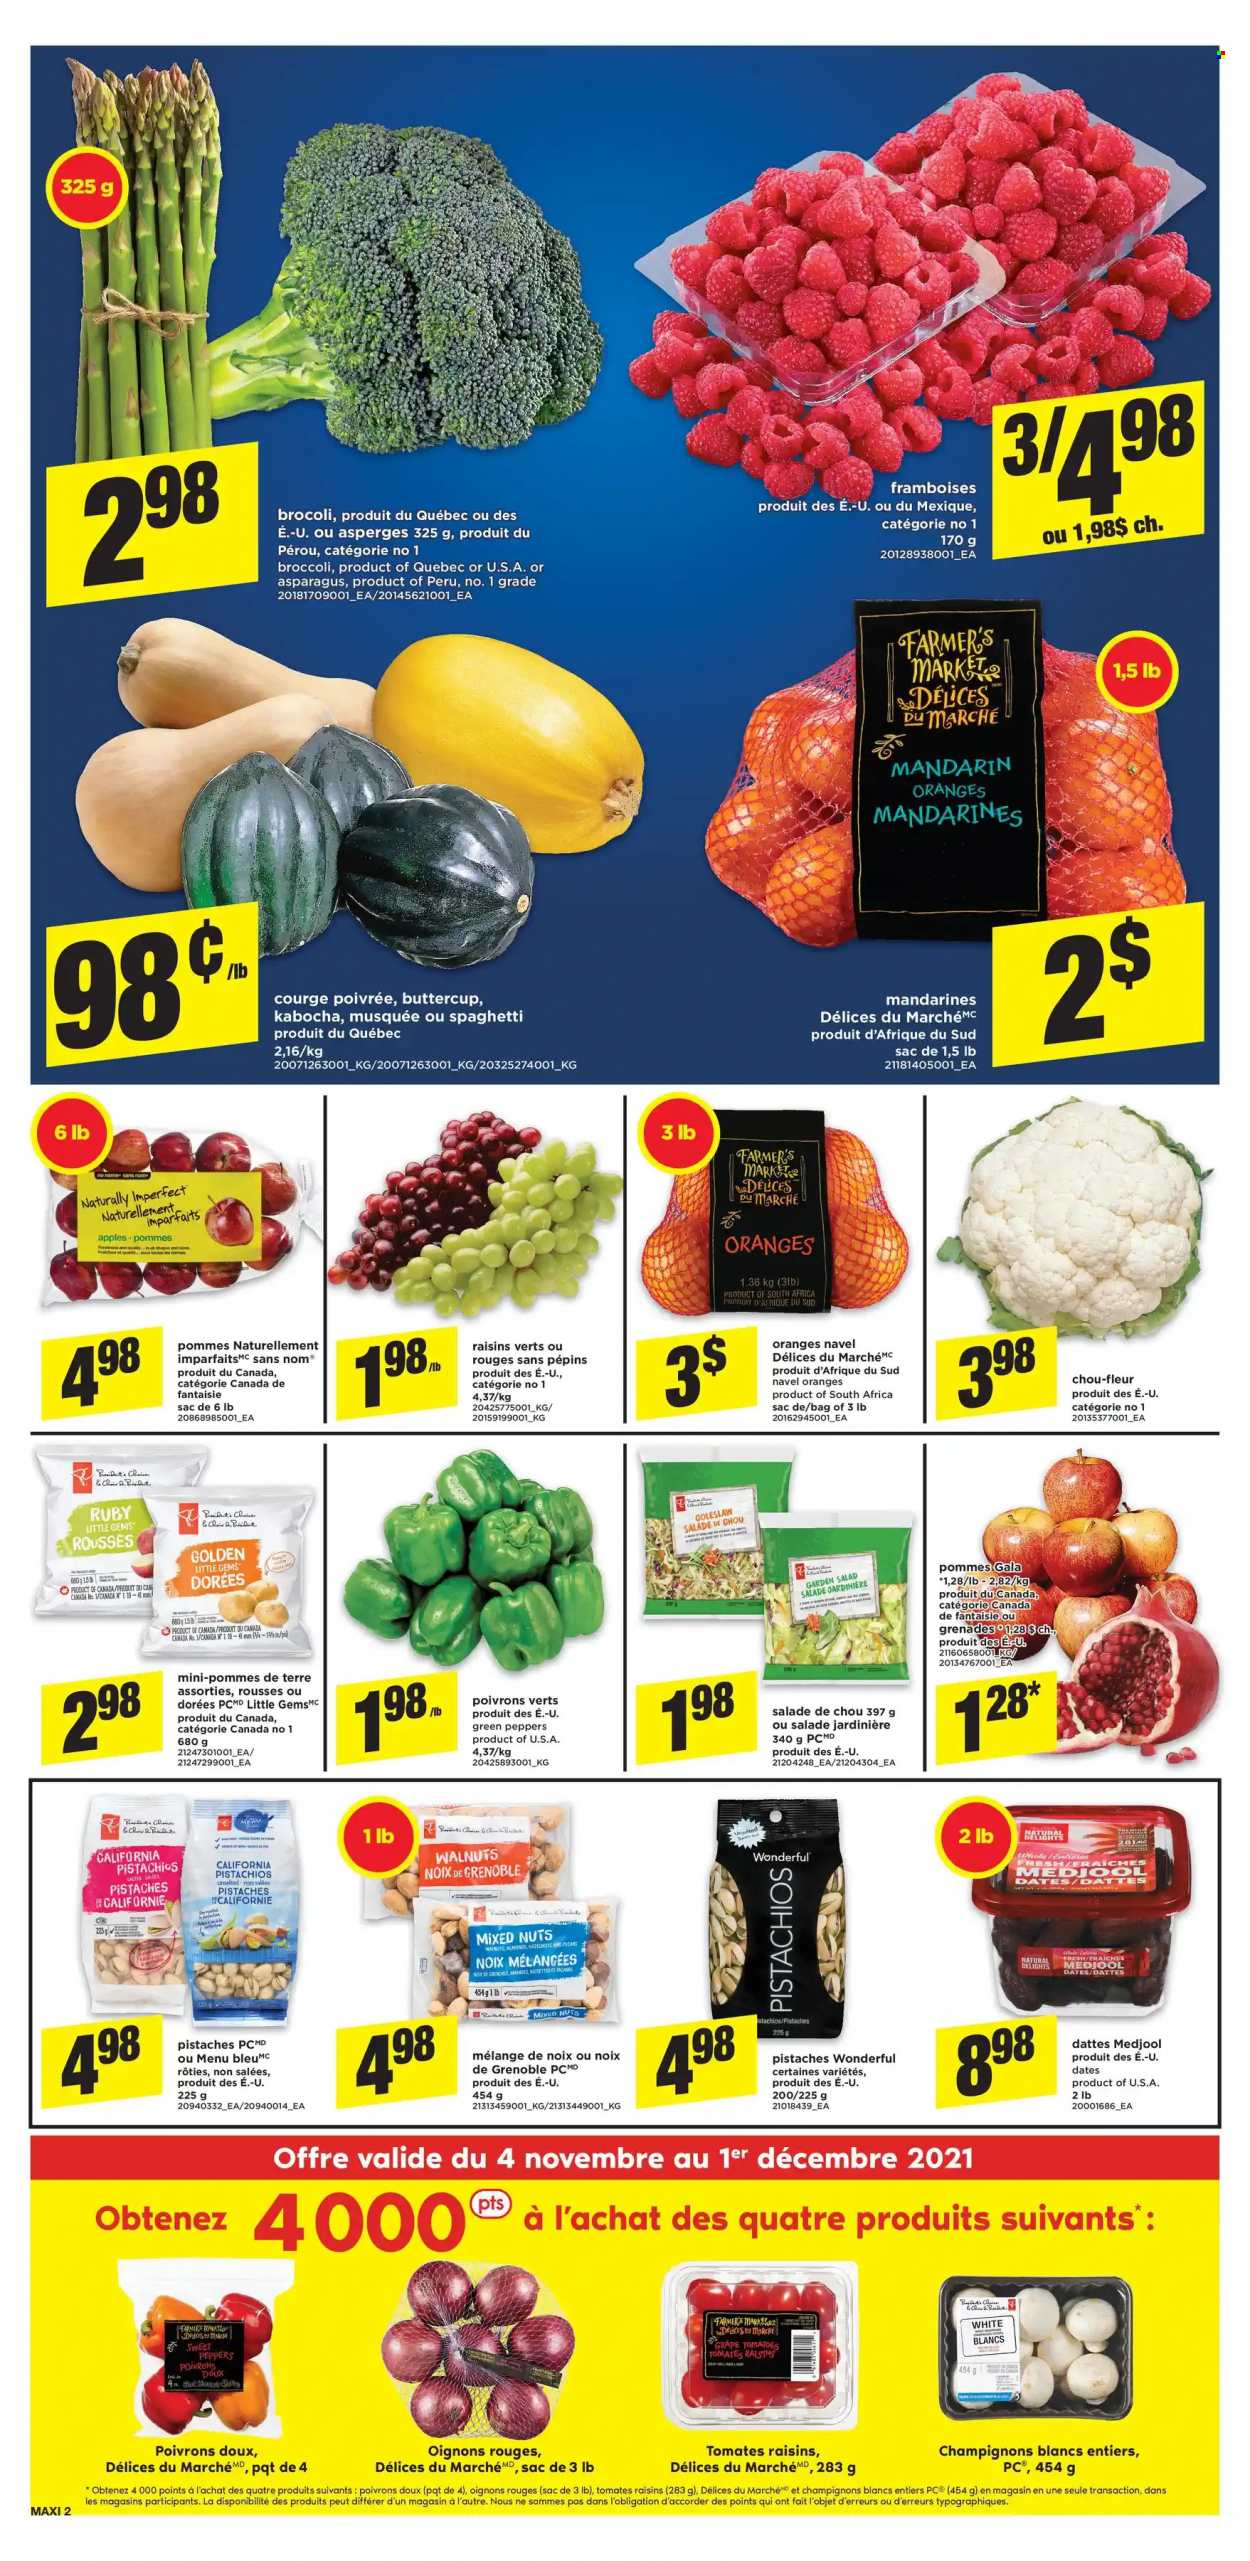 thumbnail - Maxi Flyer - November 04, 2021 - November 10, 2021 - Sales products - asparagus, broccoli, tomatoes, pumpkin, salad, peppers, apples, Gala, mandarines, navel oranges, No Name, coleslaw, spaghetti, almonds, walnuts, dried fruit, pistachios, dried dates, mixed nuts, raisins, oranges. Page 3.